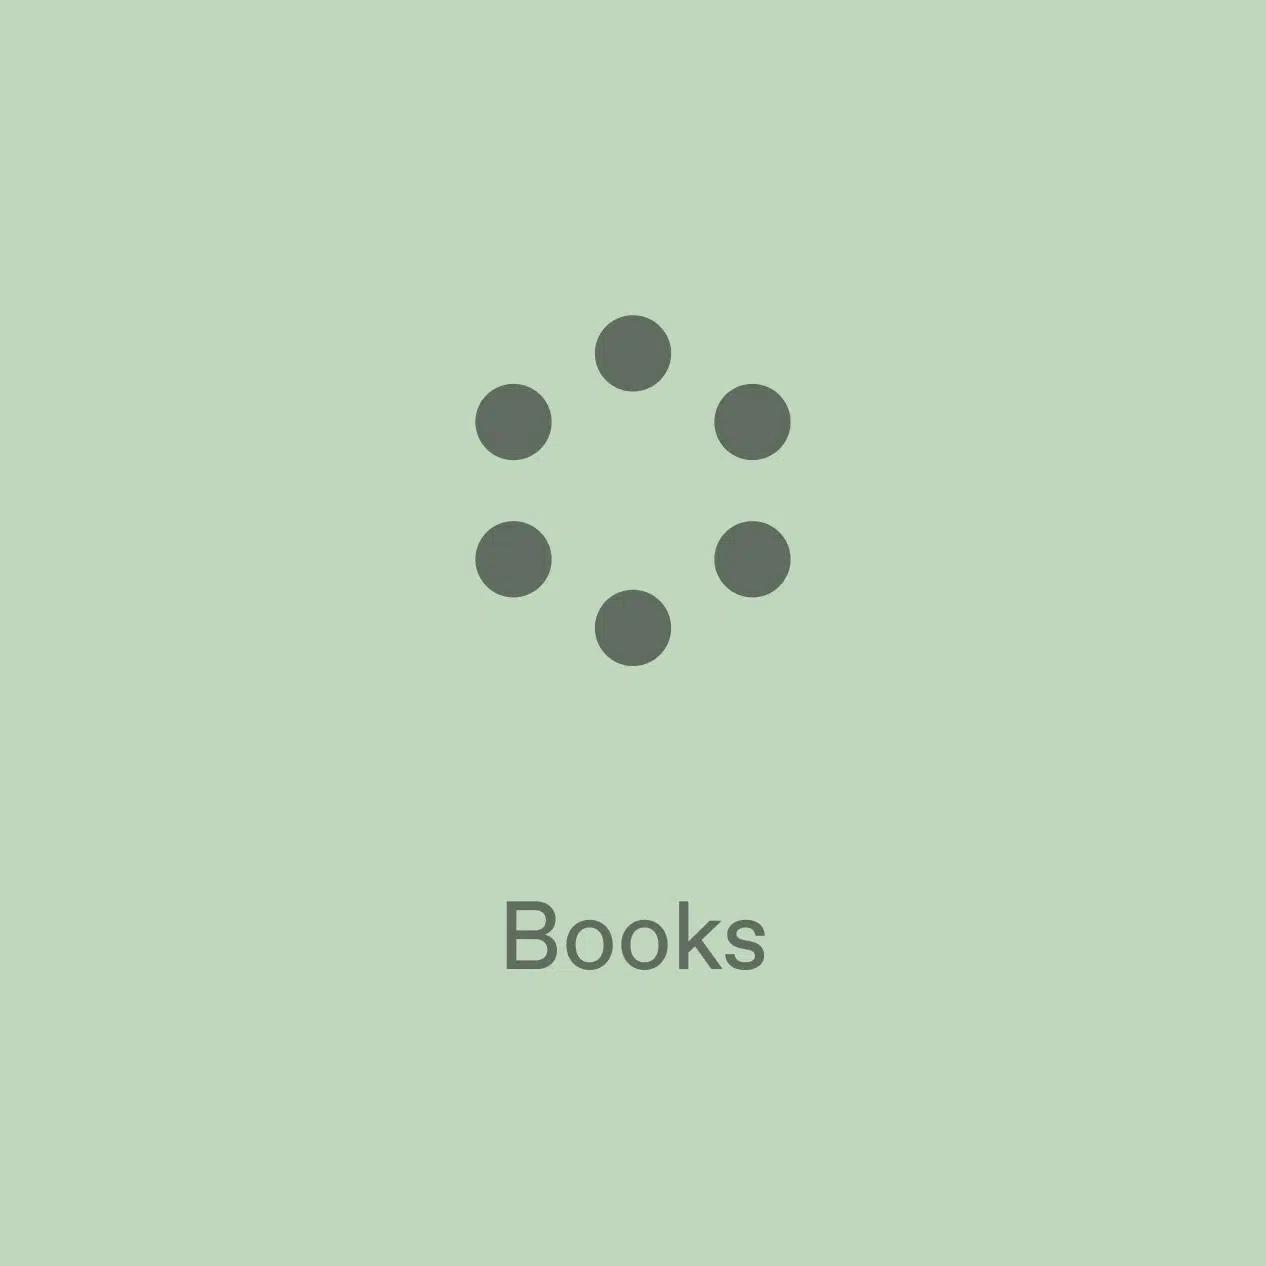 A cover of "Books" cluster. The owner is crzenna. The cluster consists of 30 elements.